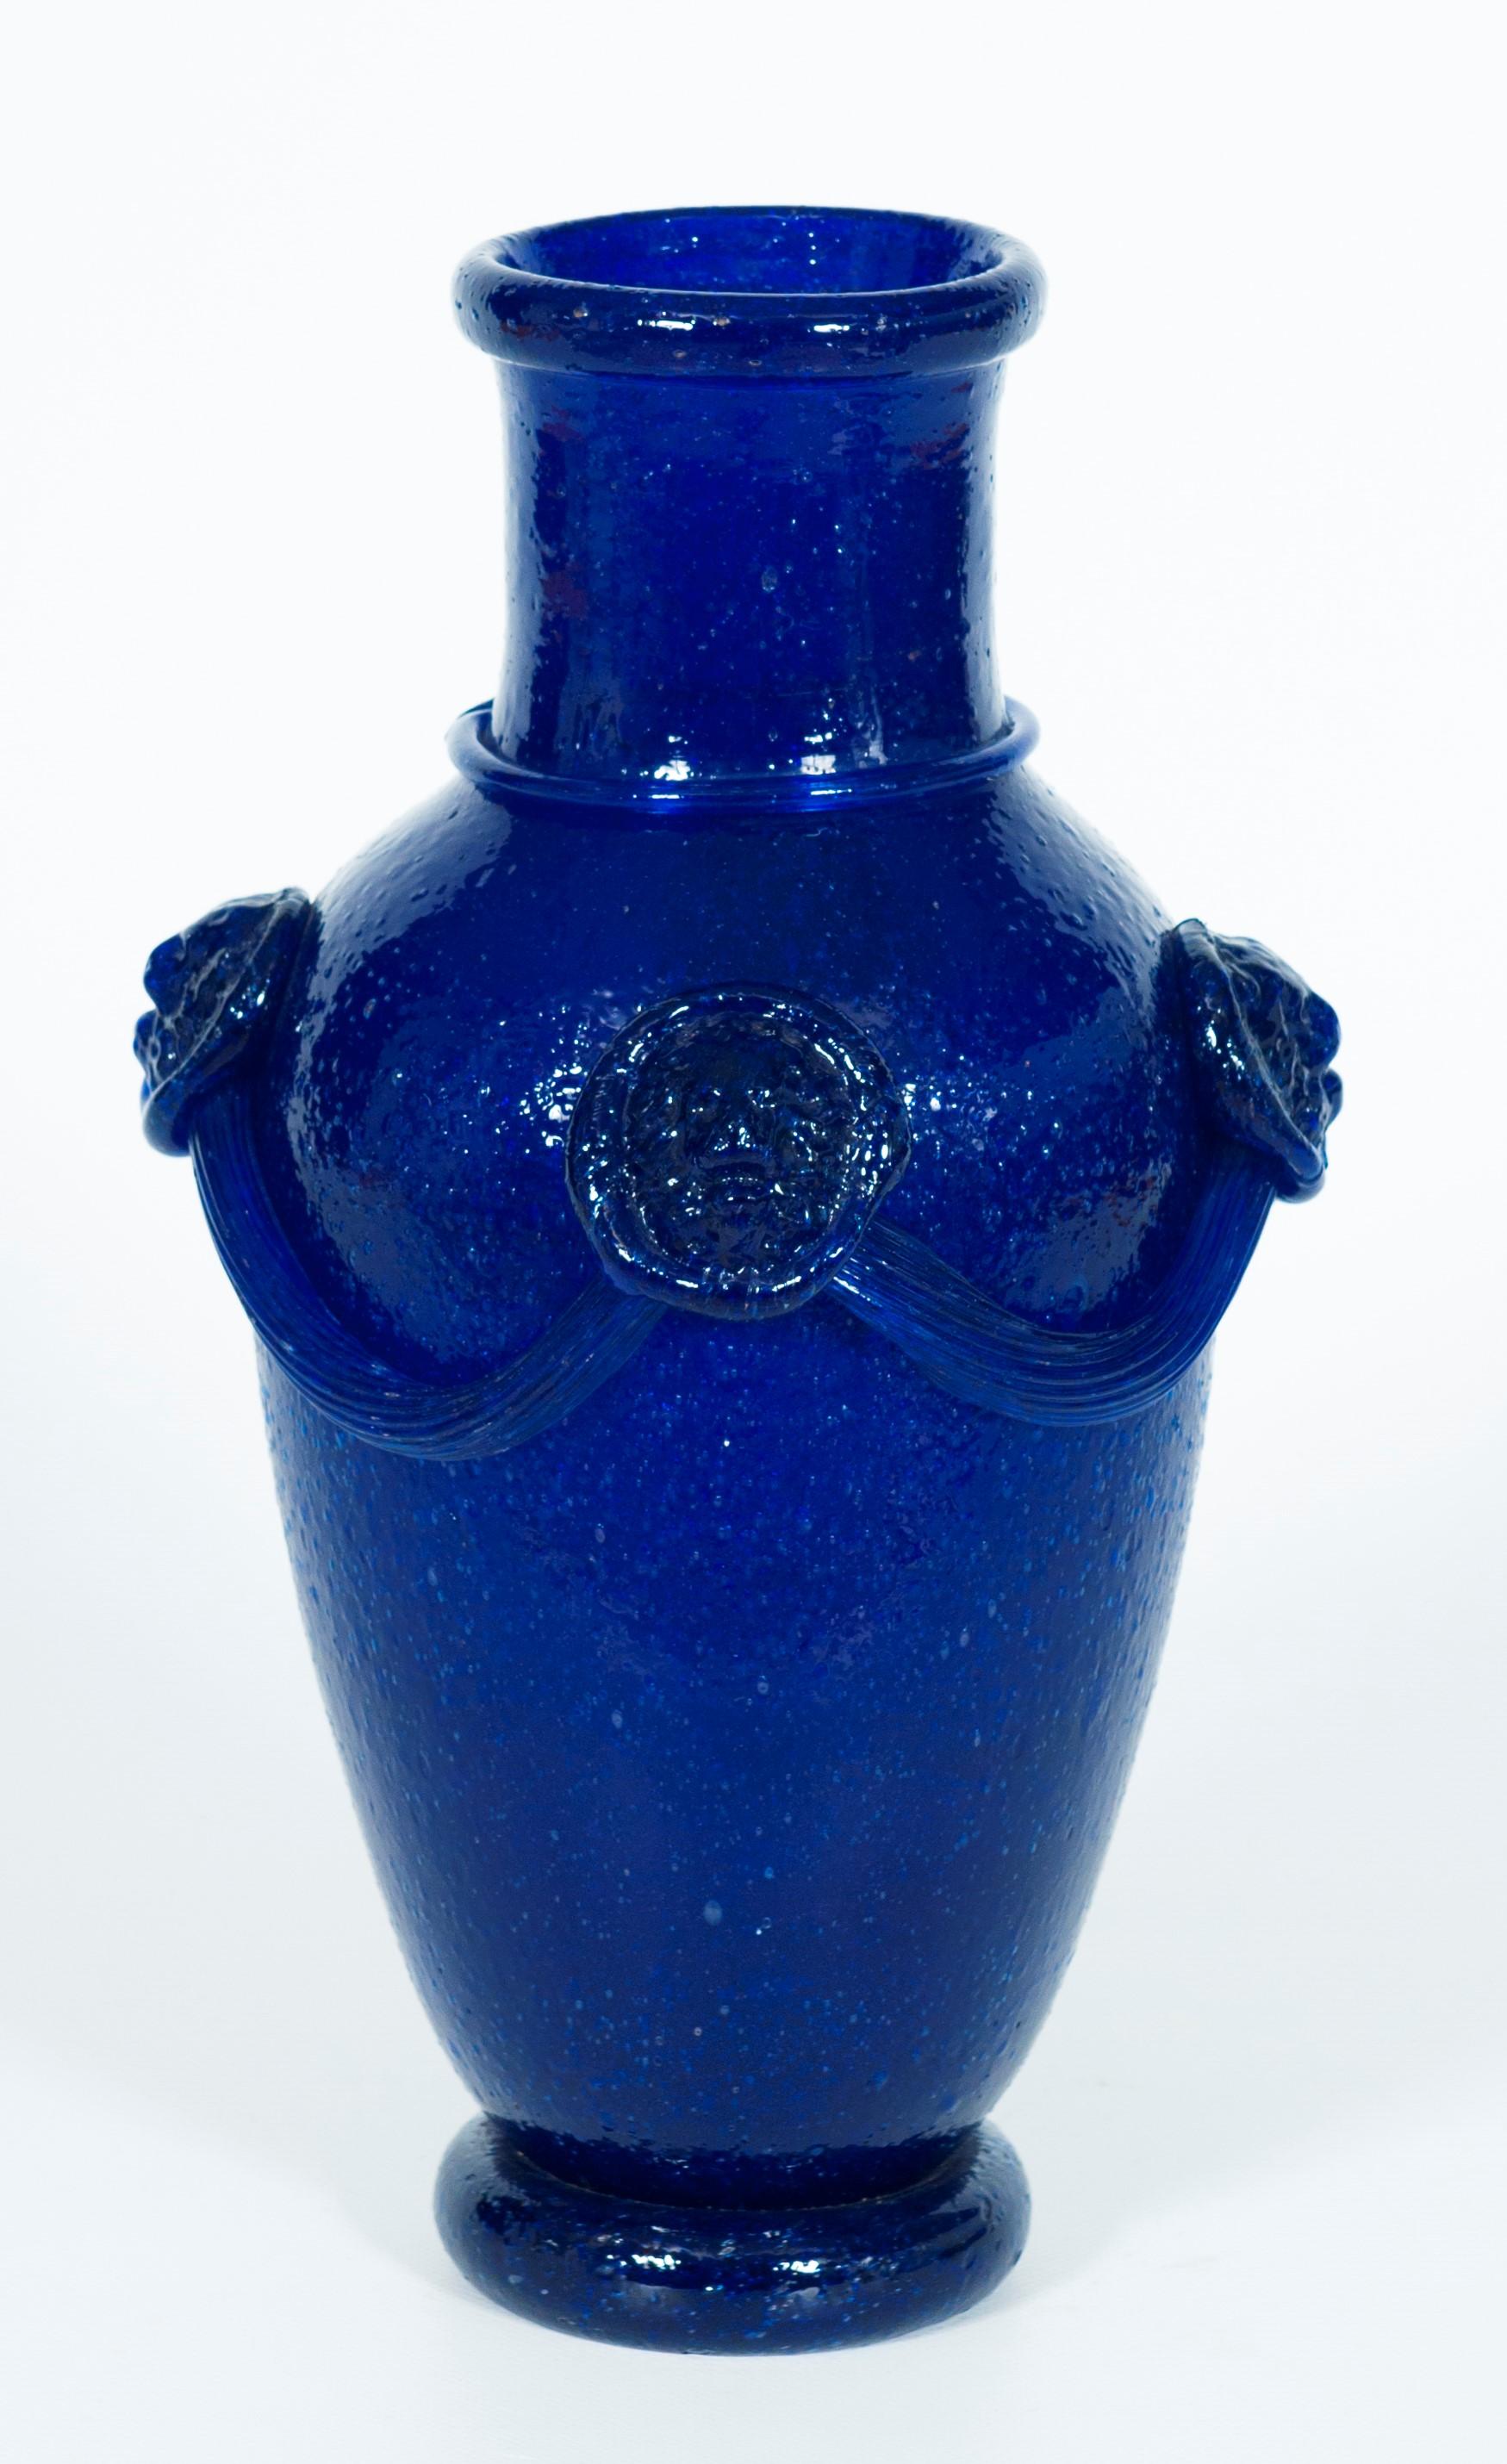 Massive blue vase in blown Murano glass Pulegoso attributed to Martinuzzi, 1950s.
This unique Venetian vase in blown Murano glass was manufactured with a special processing, called Pulegoso, which consists in boiling the piece to obtain a